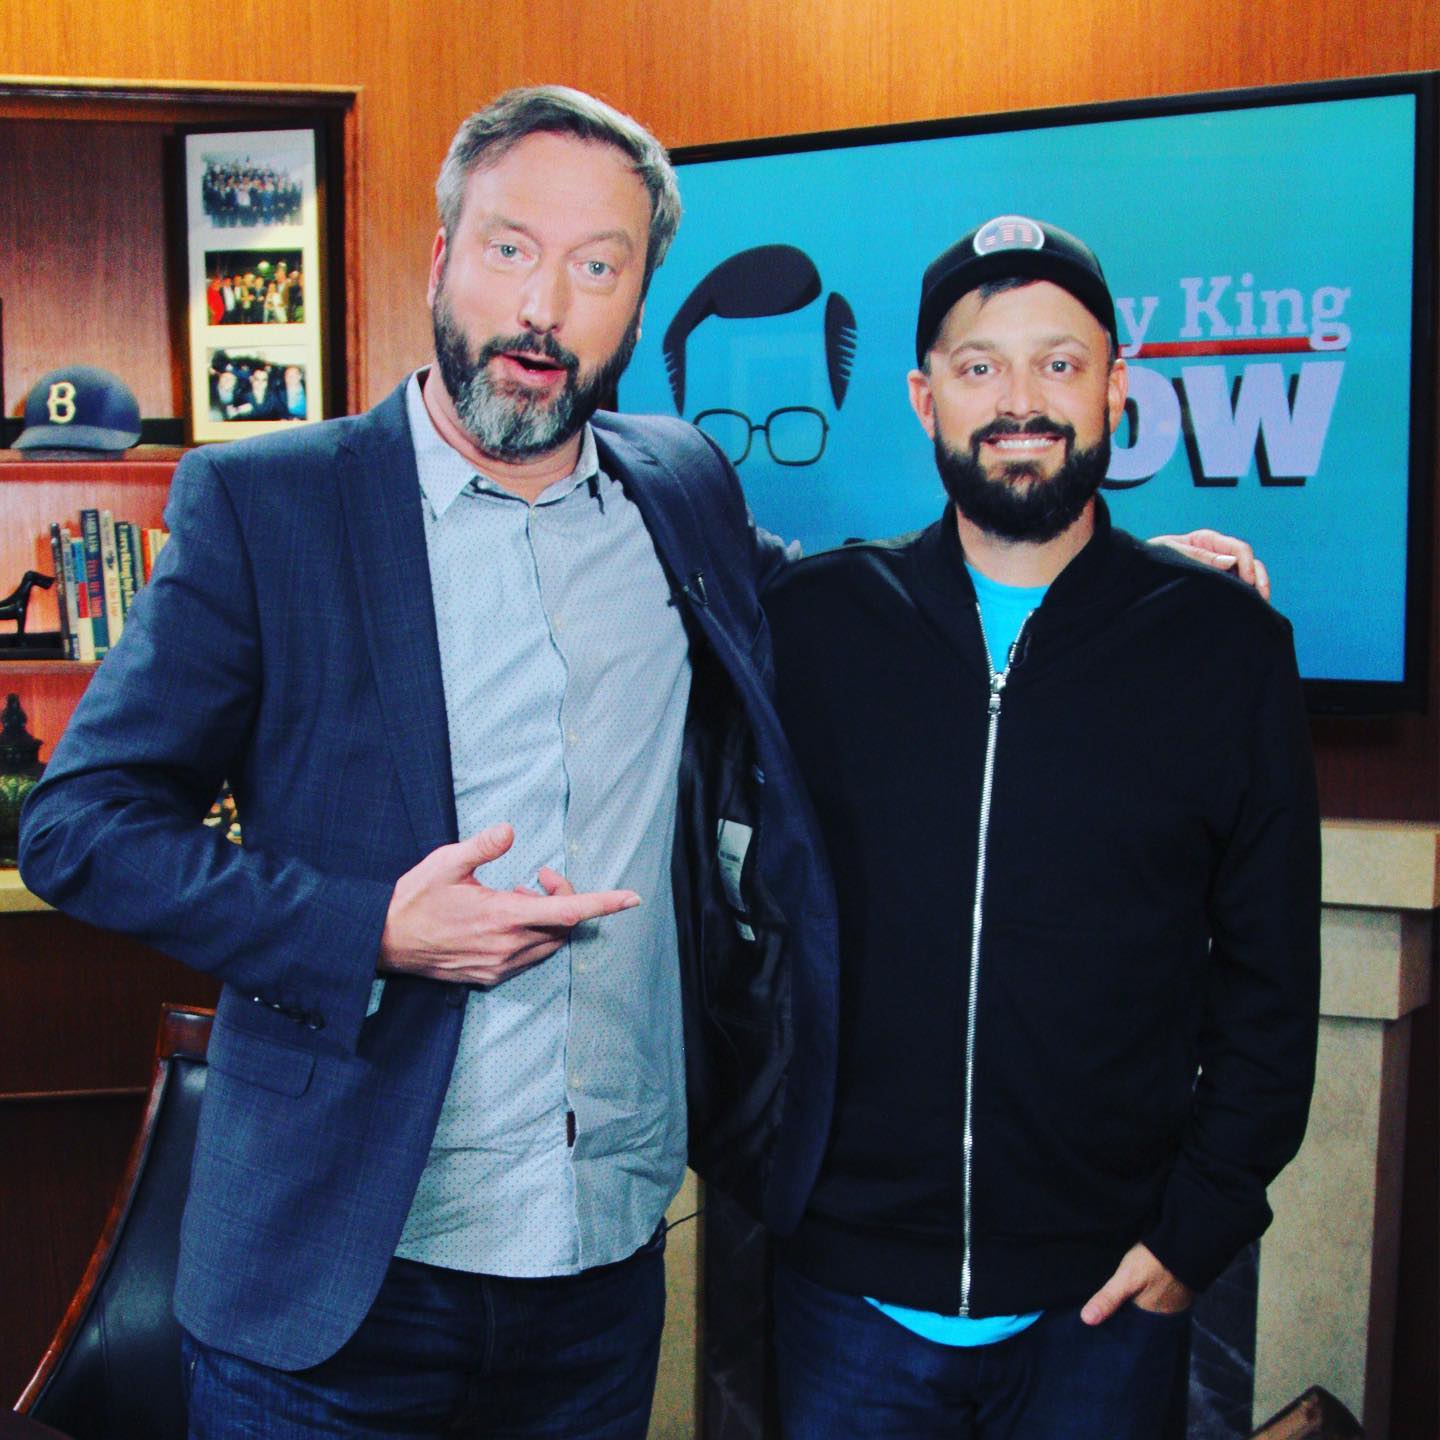 Hangin out with the hilarious @natebargatze who has an awesome new comedy special on Tune in to where I am guest hosting for the legendary @larrykingnow Thanks Larry!